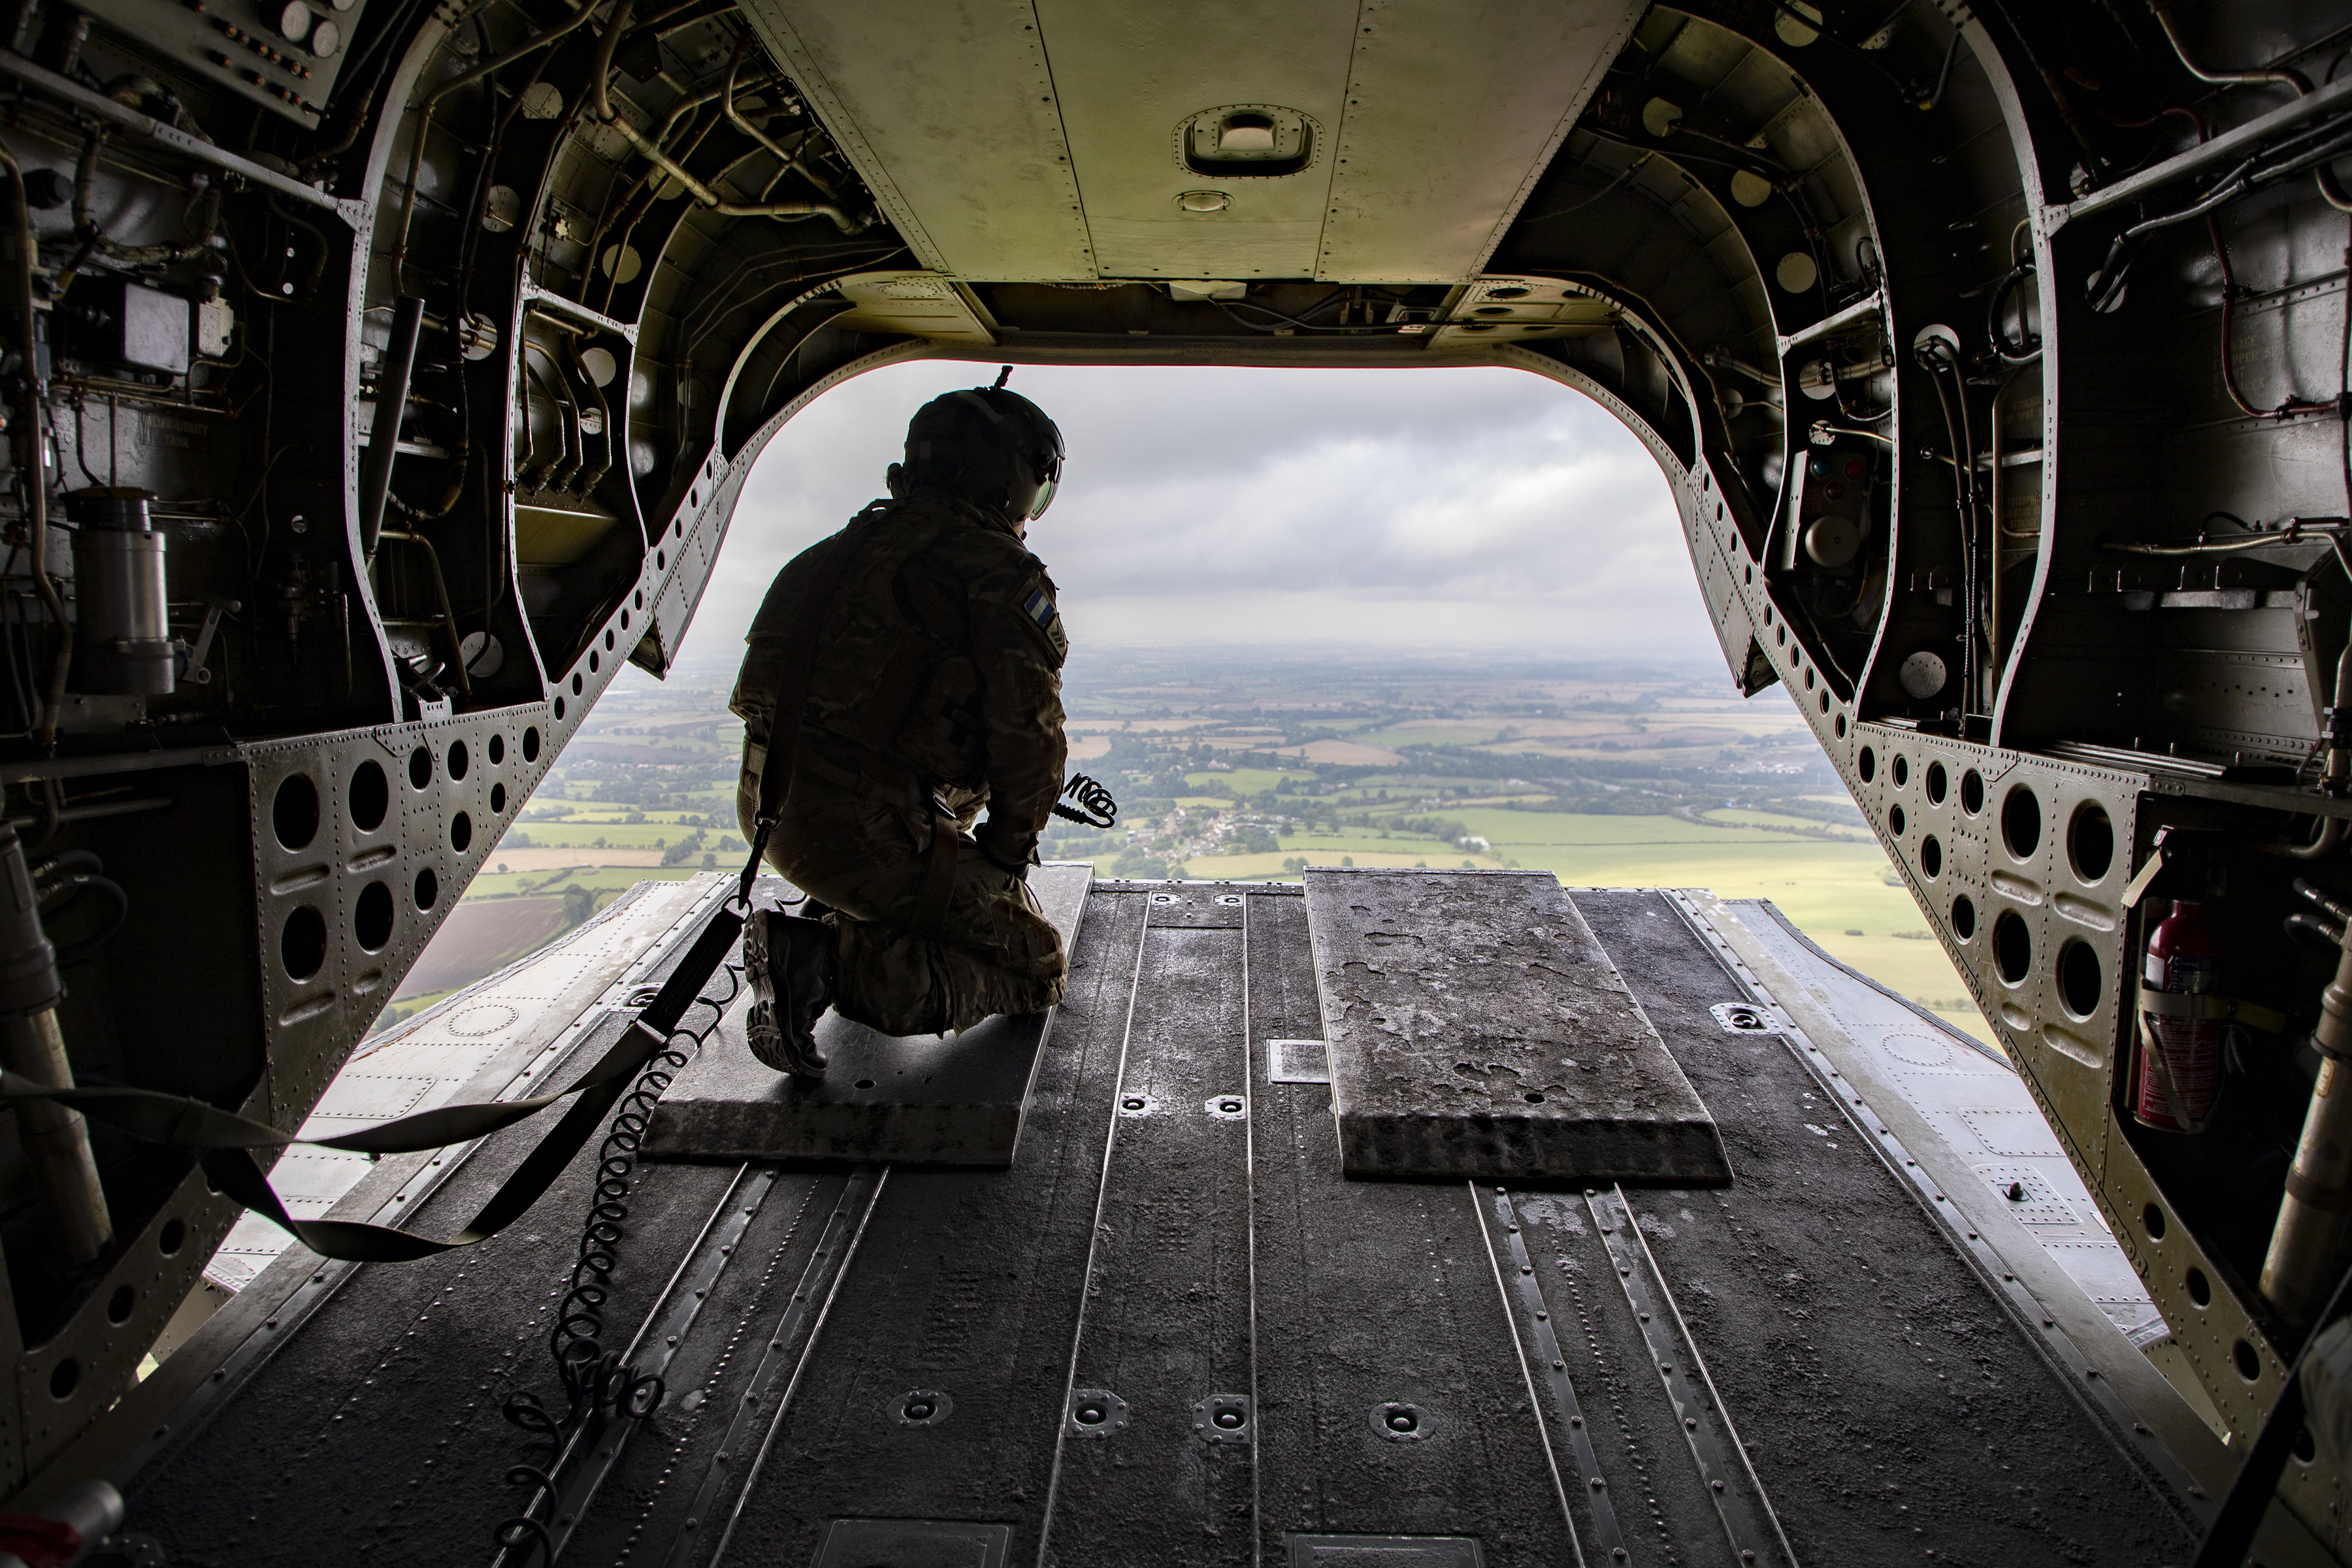 Image shows RAF personnel looking out from loading bay of helicopter as it flies.